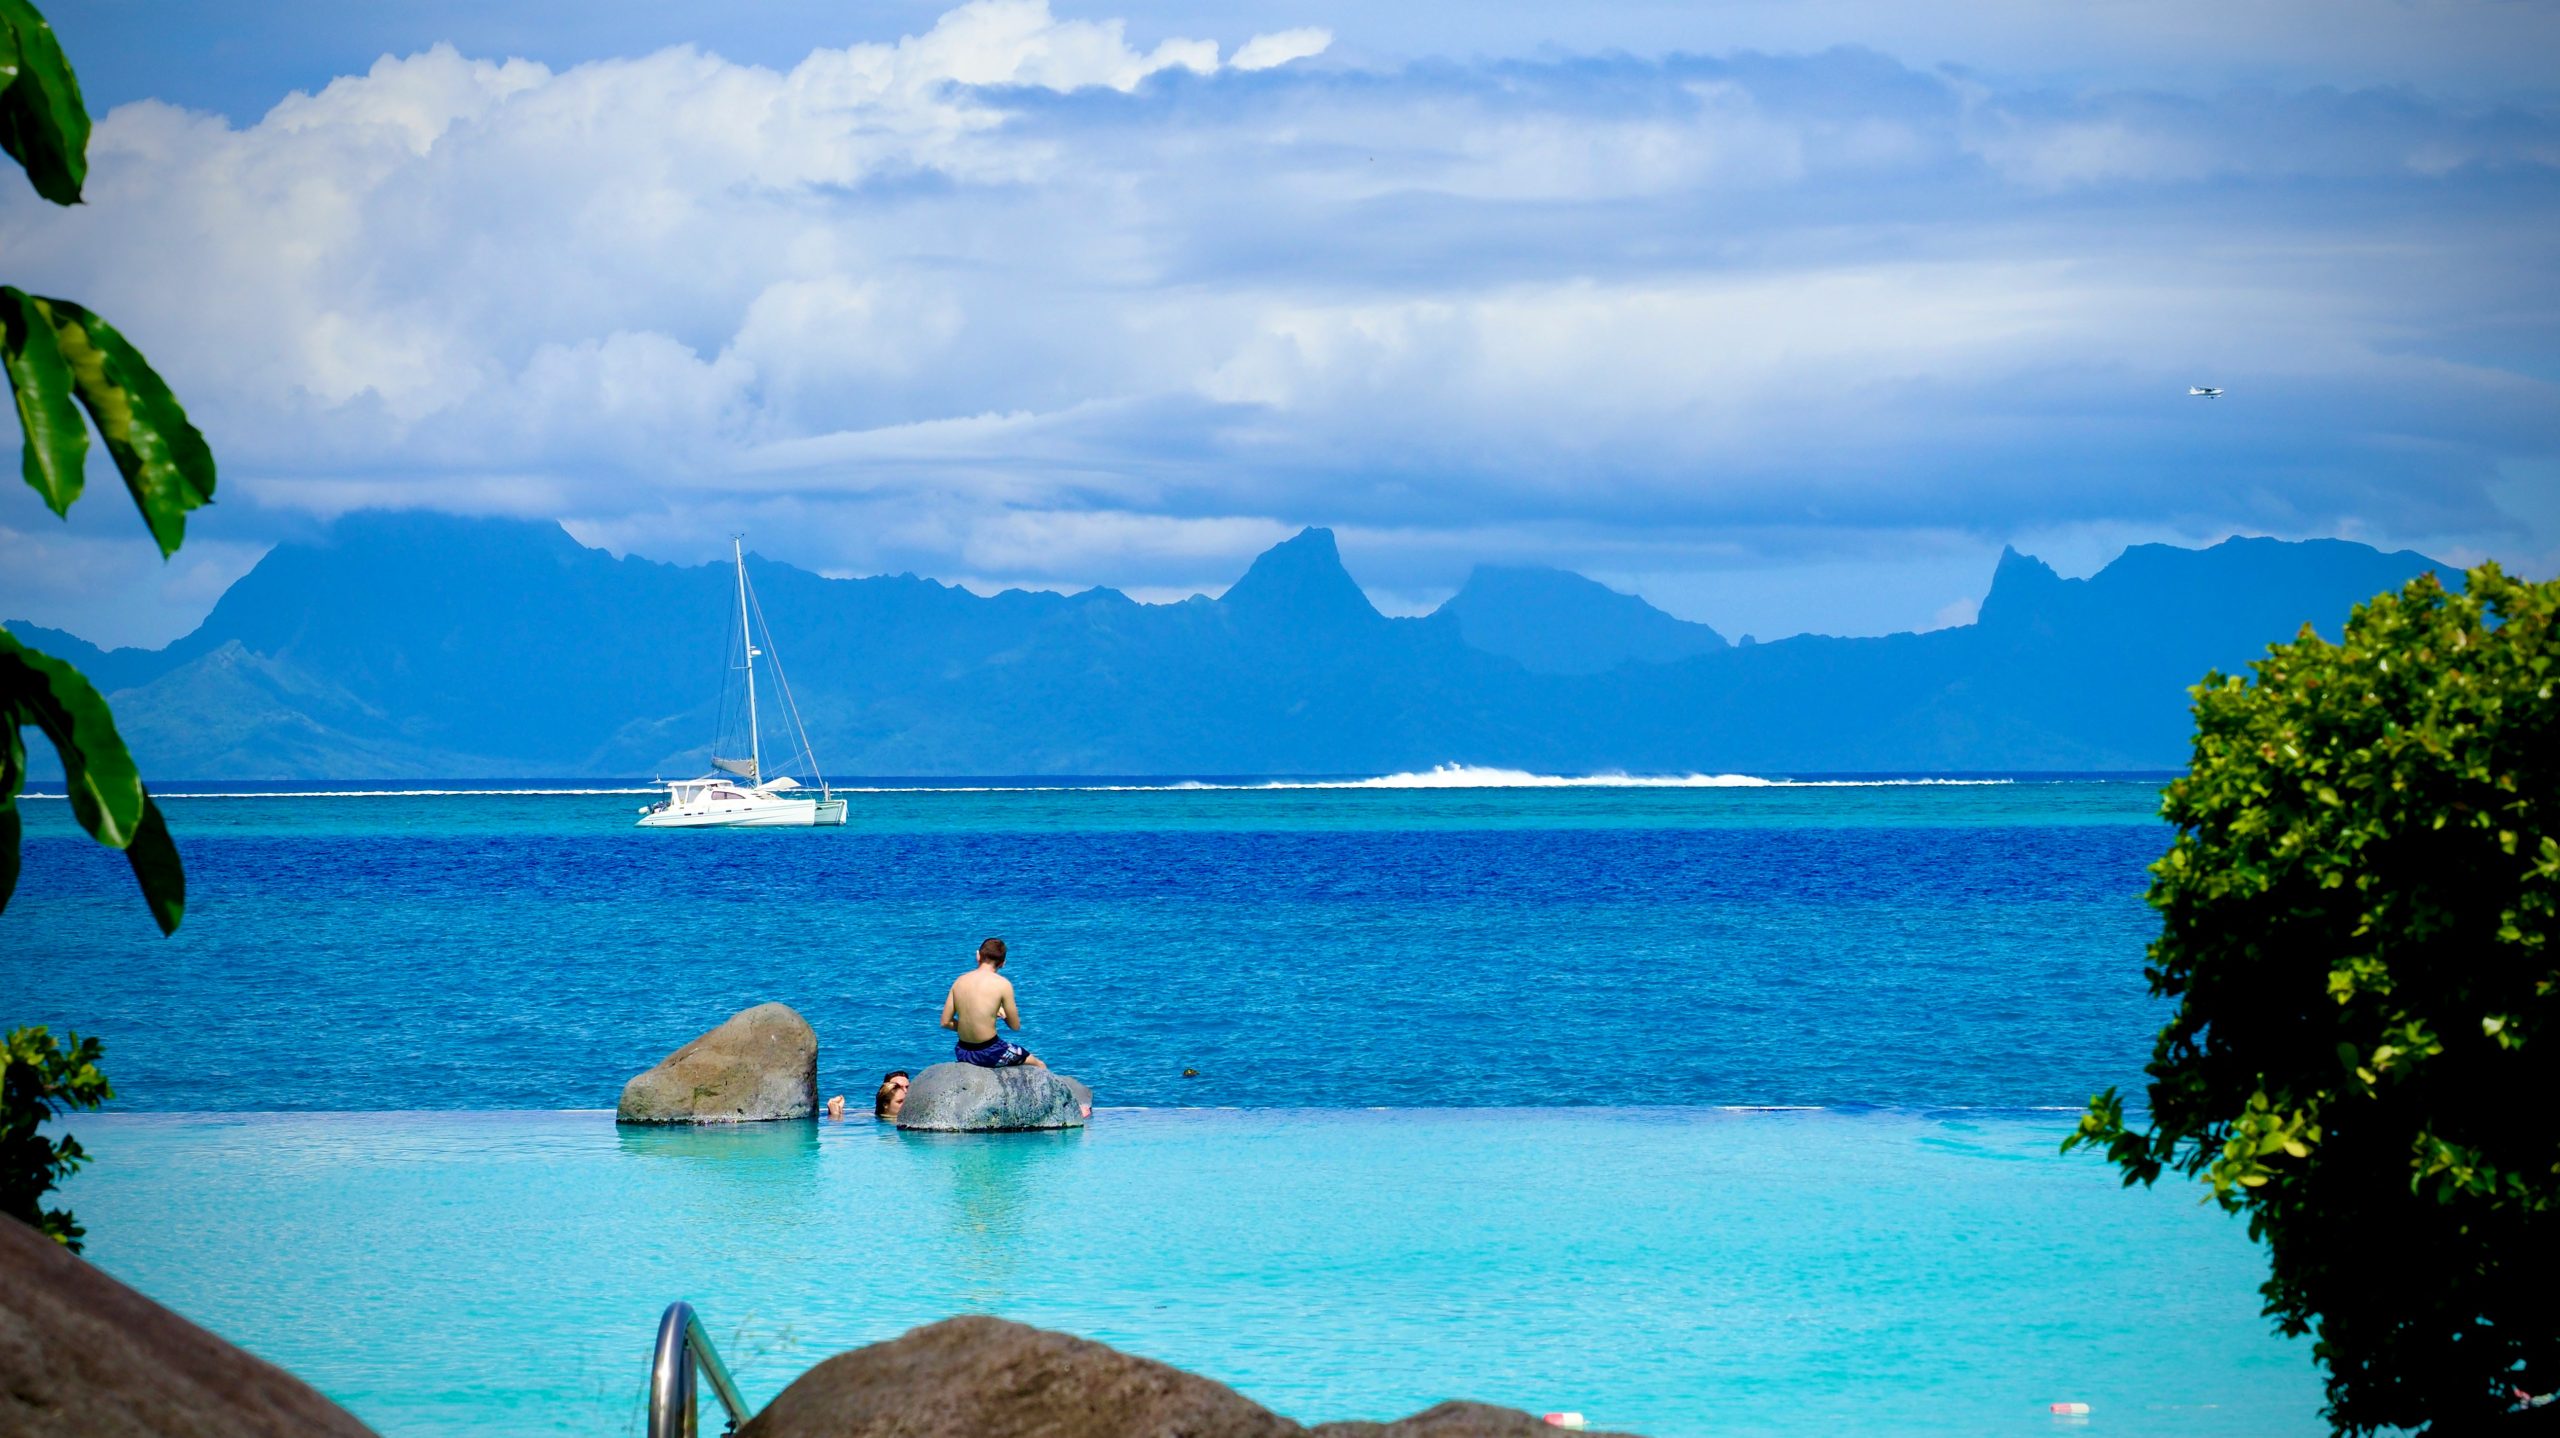 explore the natural beauty and rich culture of tahiti with tahiti tourism. plan your perfect island getaway with our travel guides and insider tips.